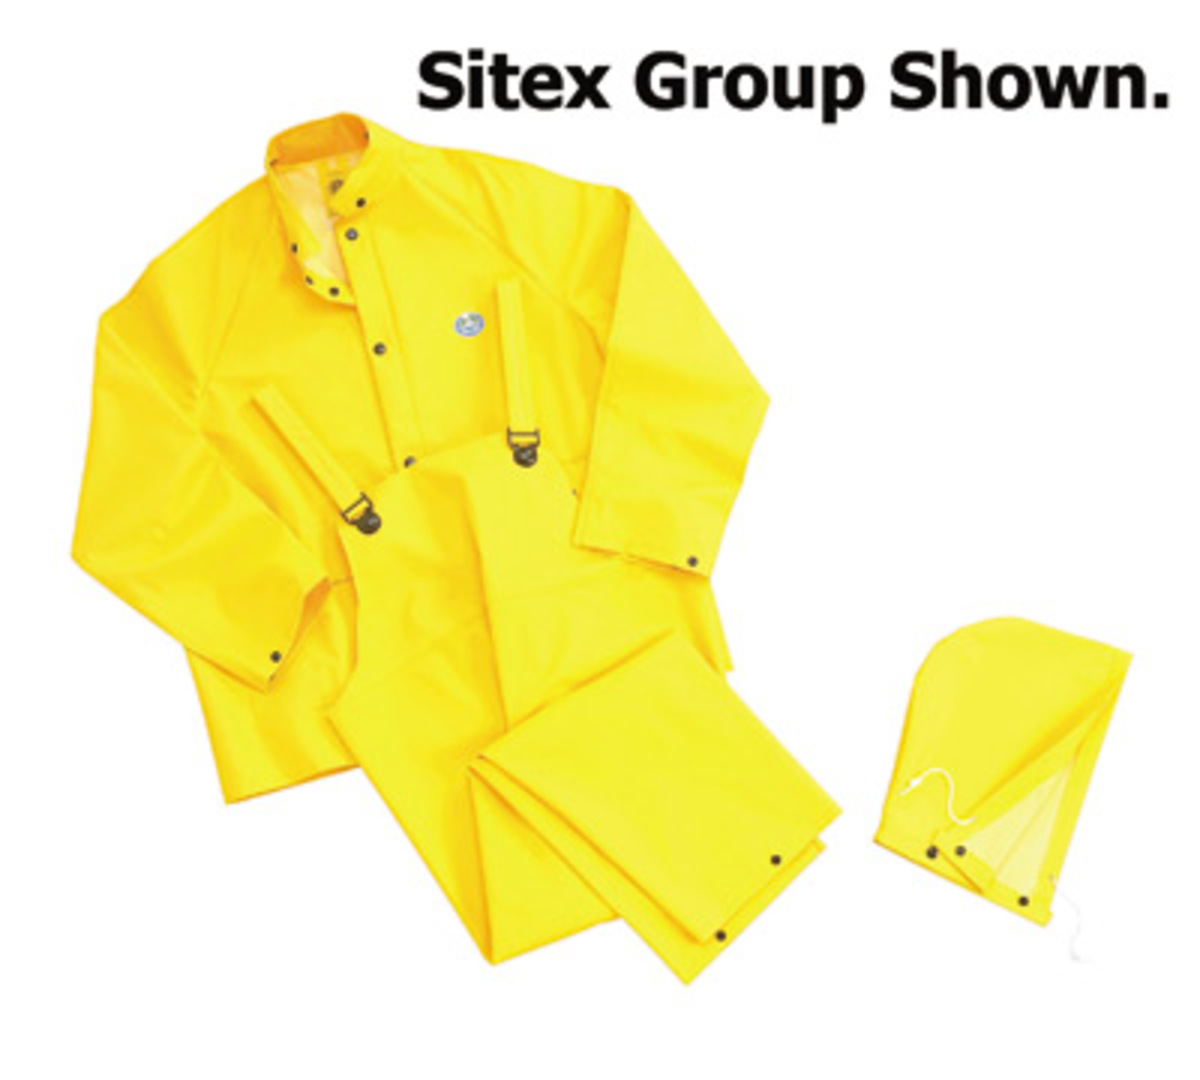 Dunlop® Protective Footwear 3X Yellow Sitex Polyester/PVC Rain Suit With Detachable Hood